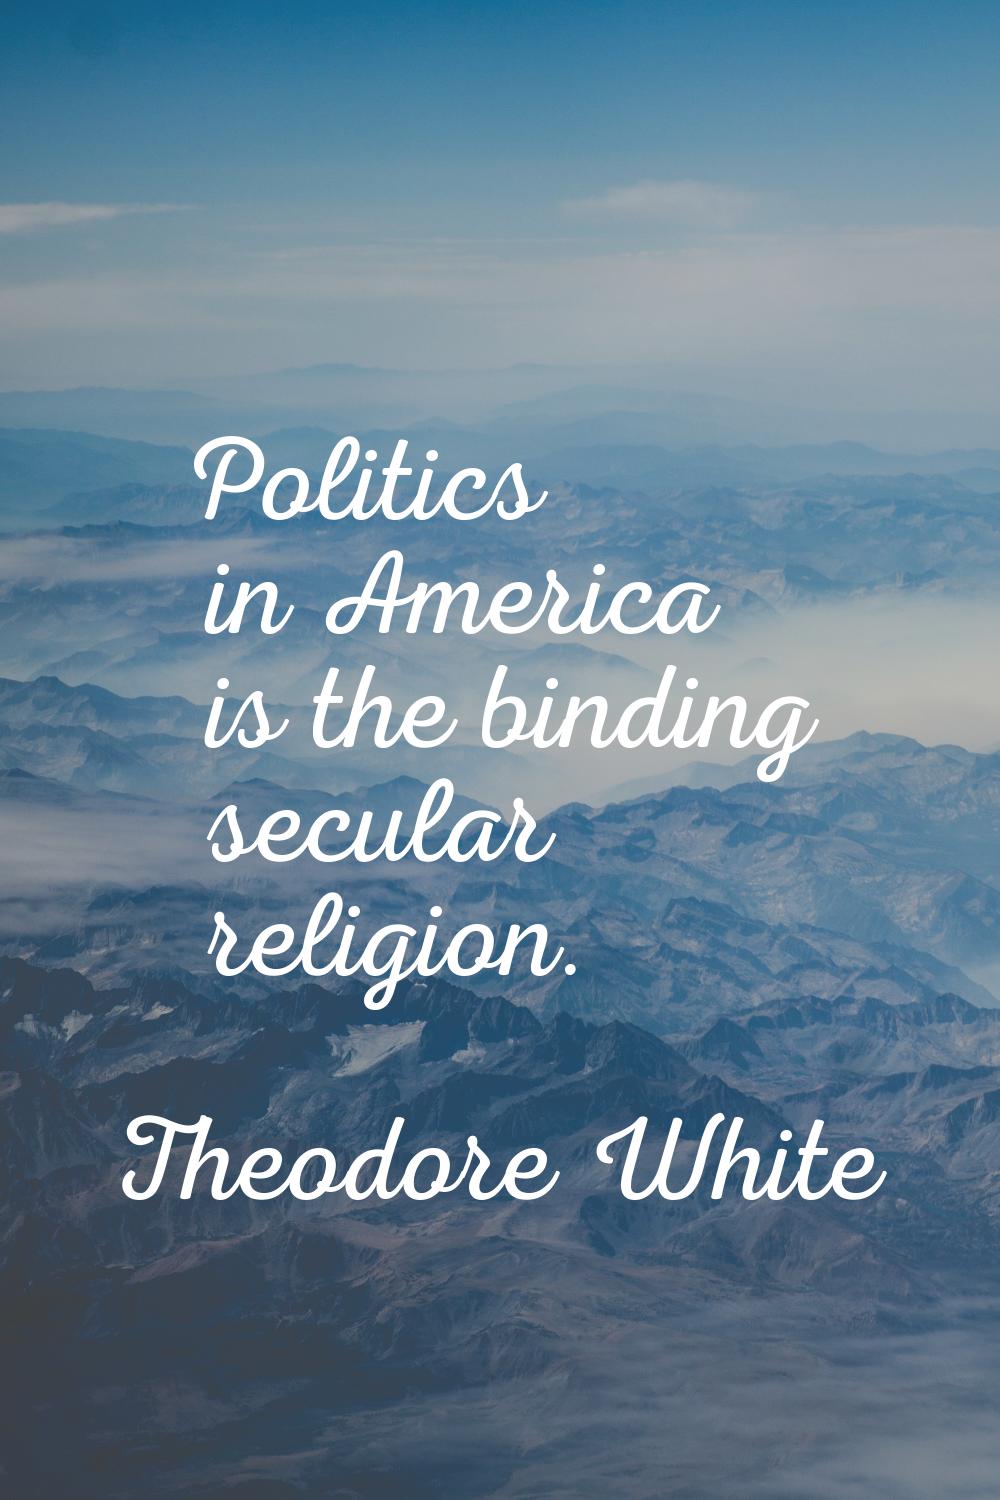 Politics in America is the binding secular religion.